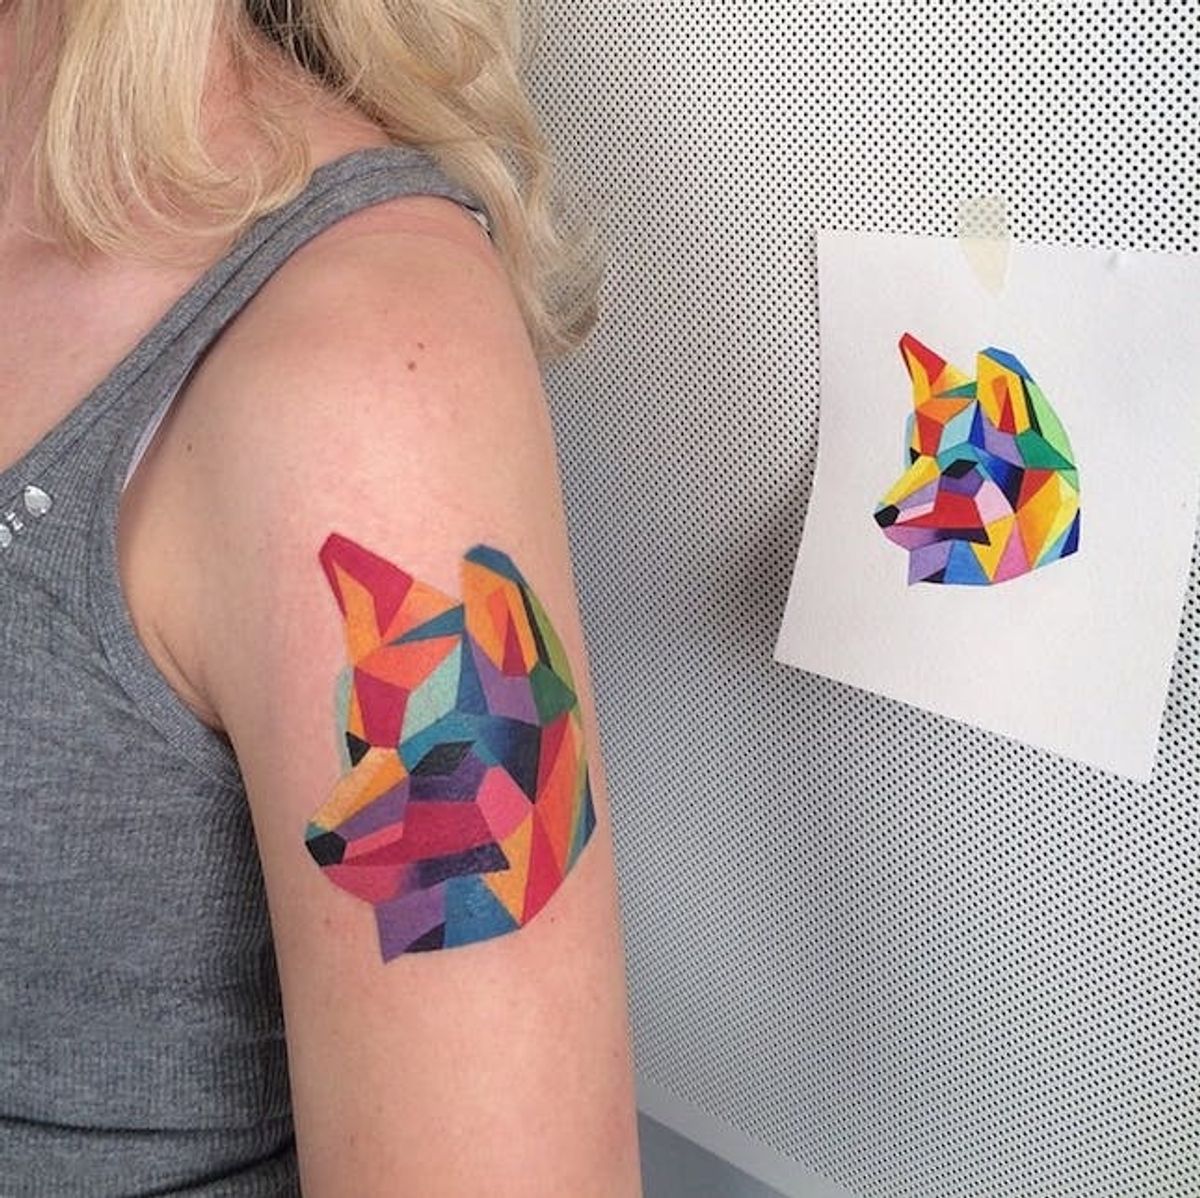 18 Gorgeous Tattoo Artists on Instagram Who Will Make You Want Some Ink